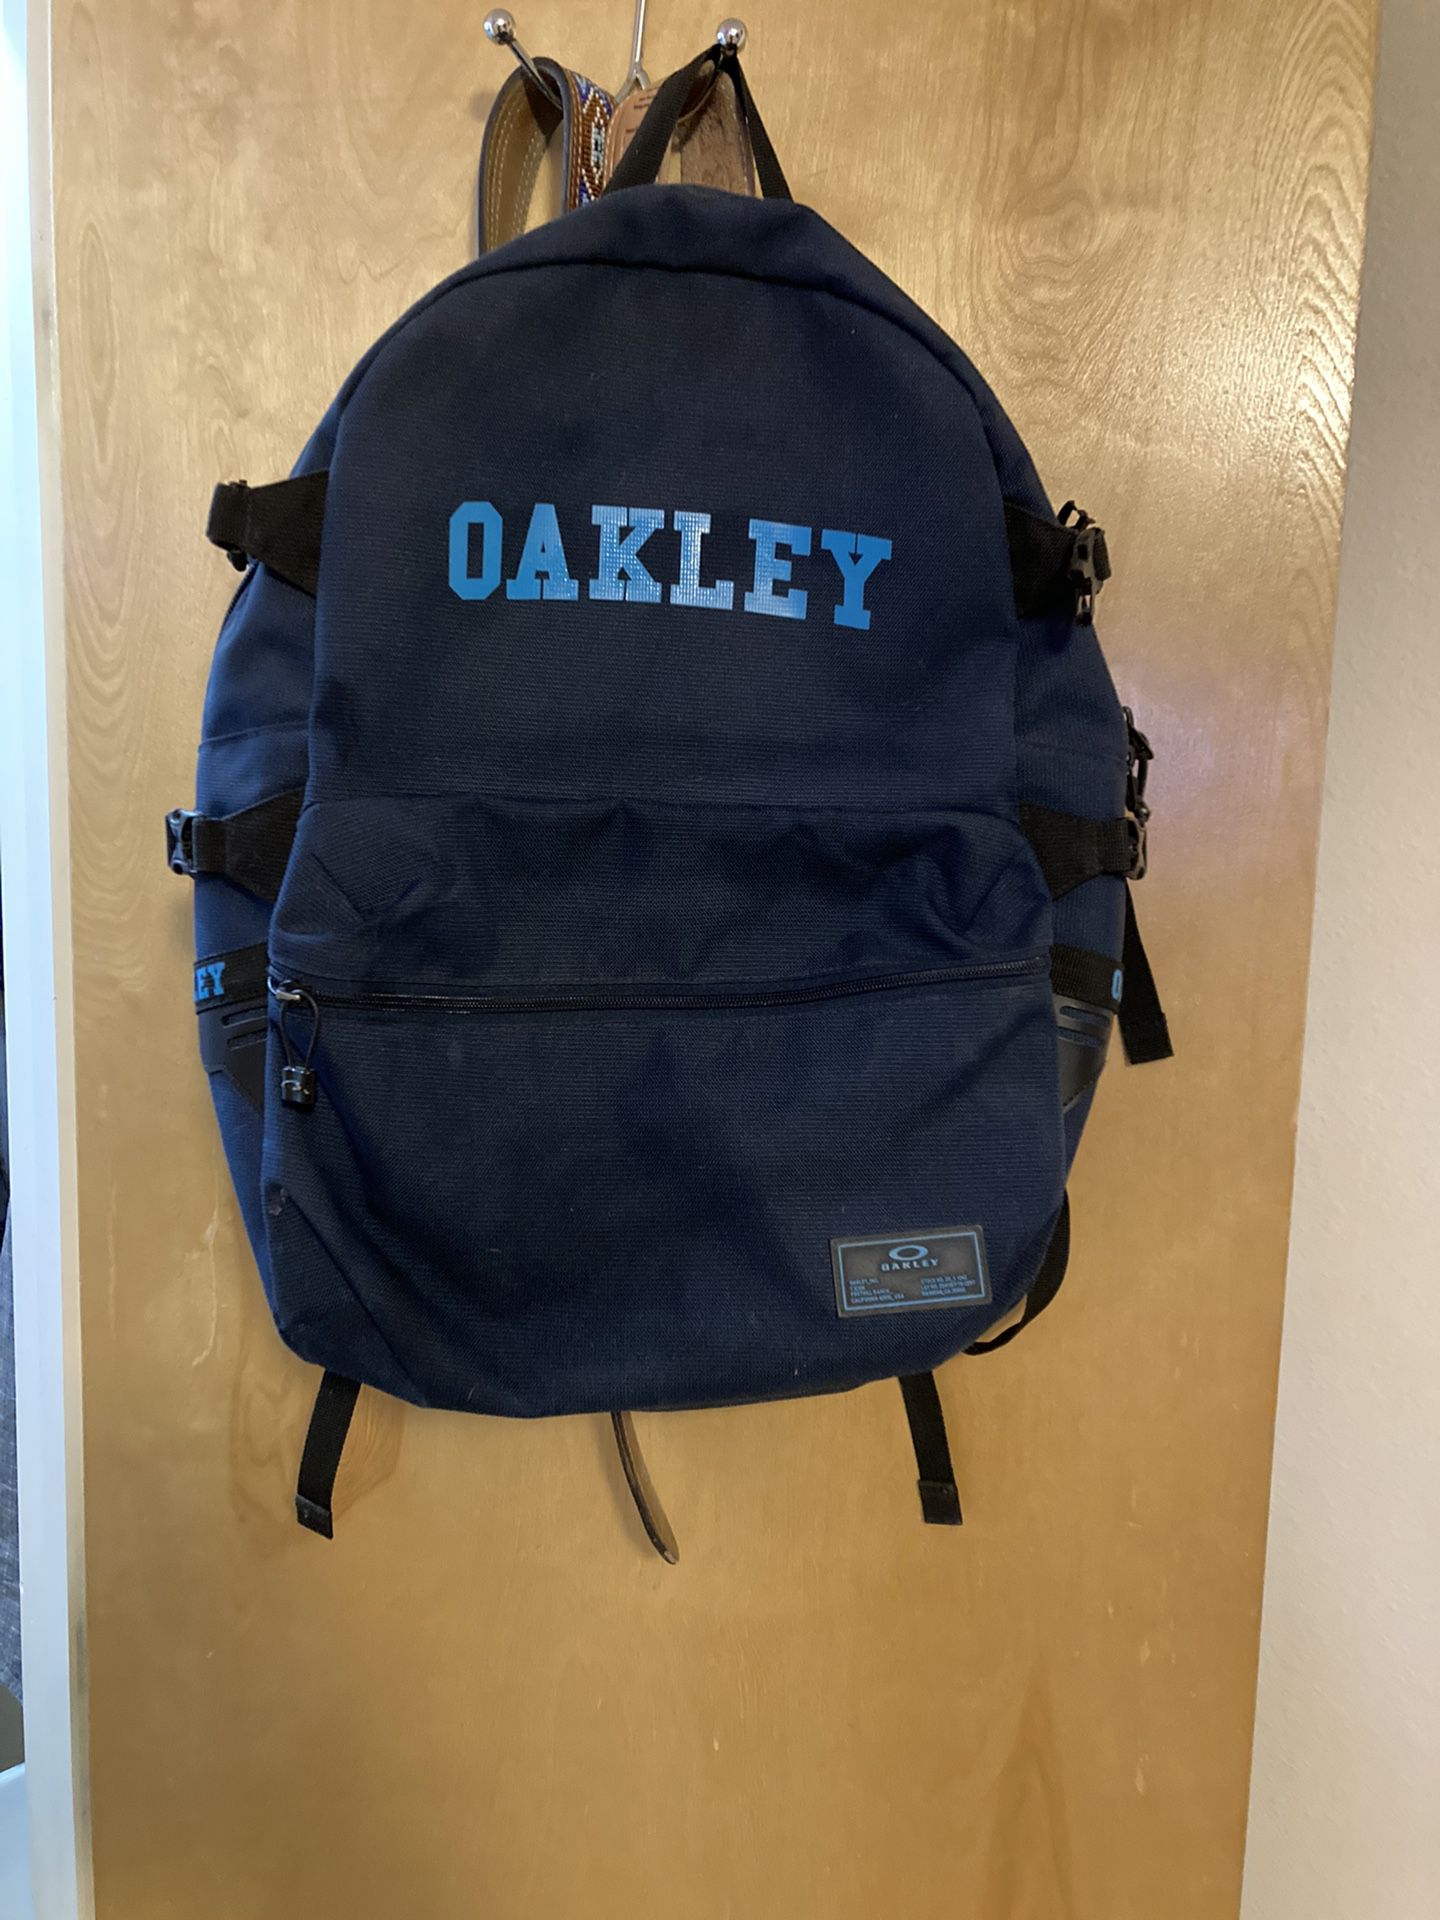 Oakley Backpack,  Great Condition 